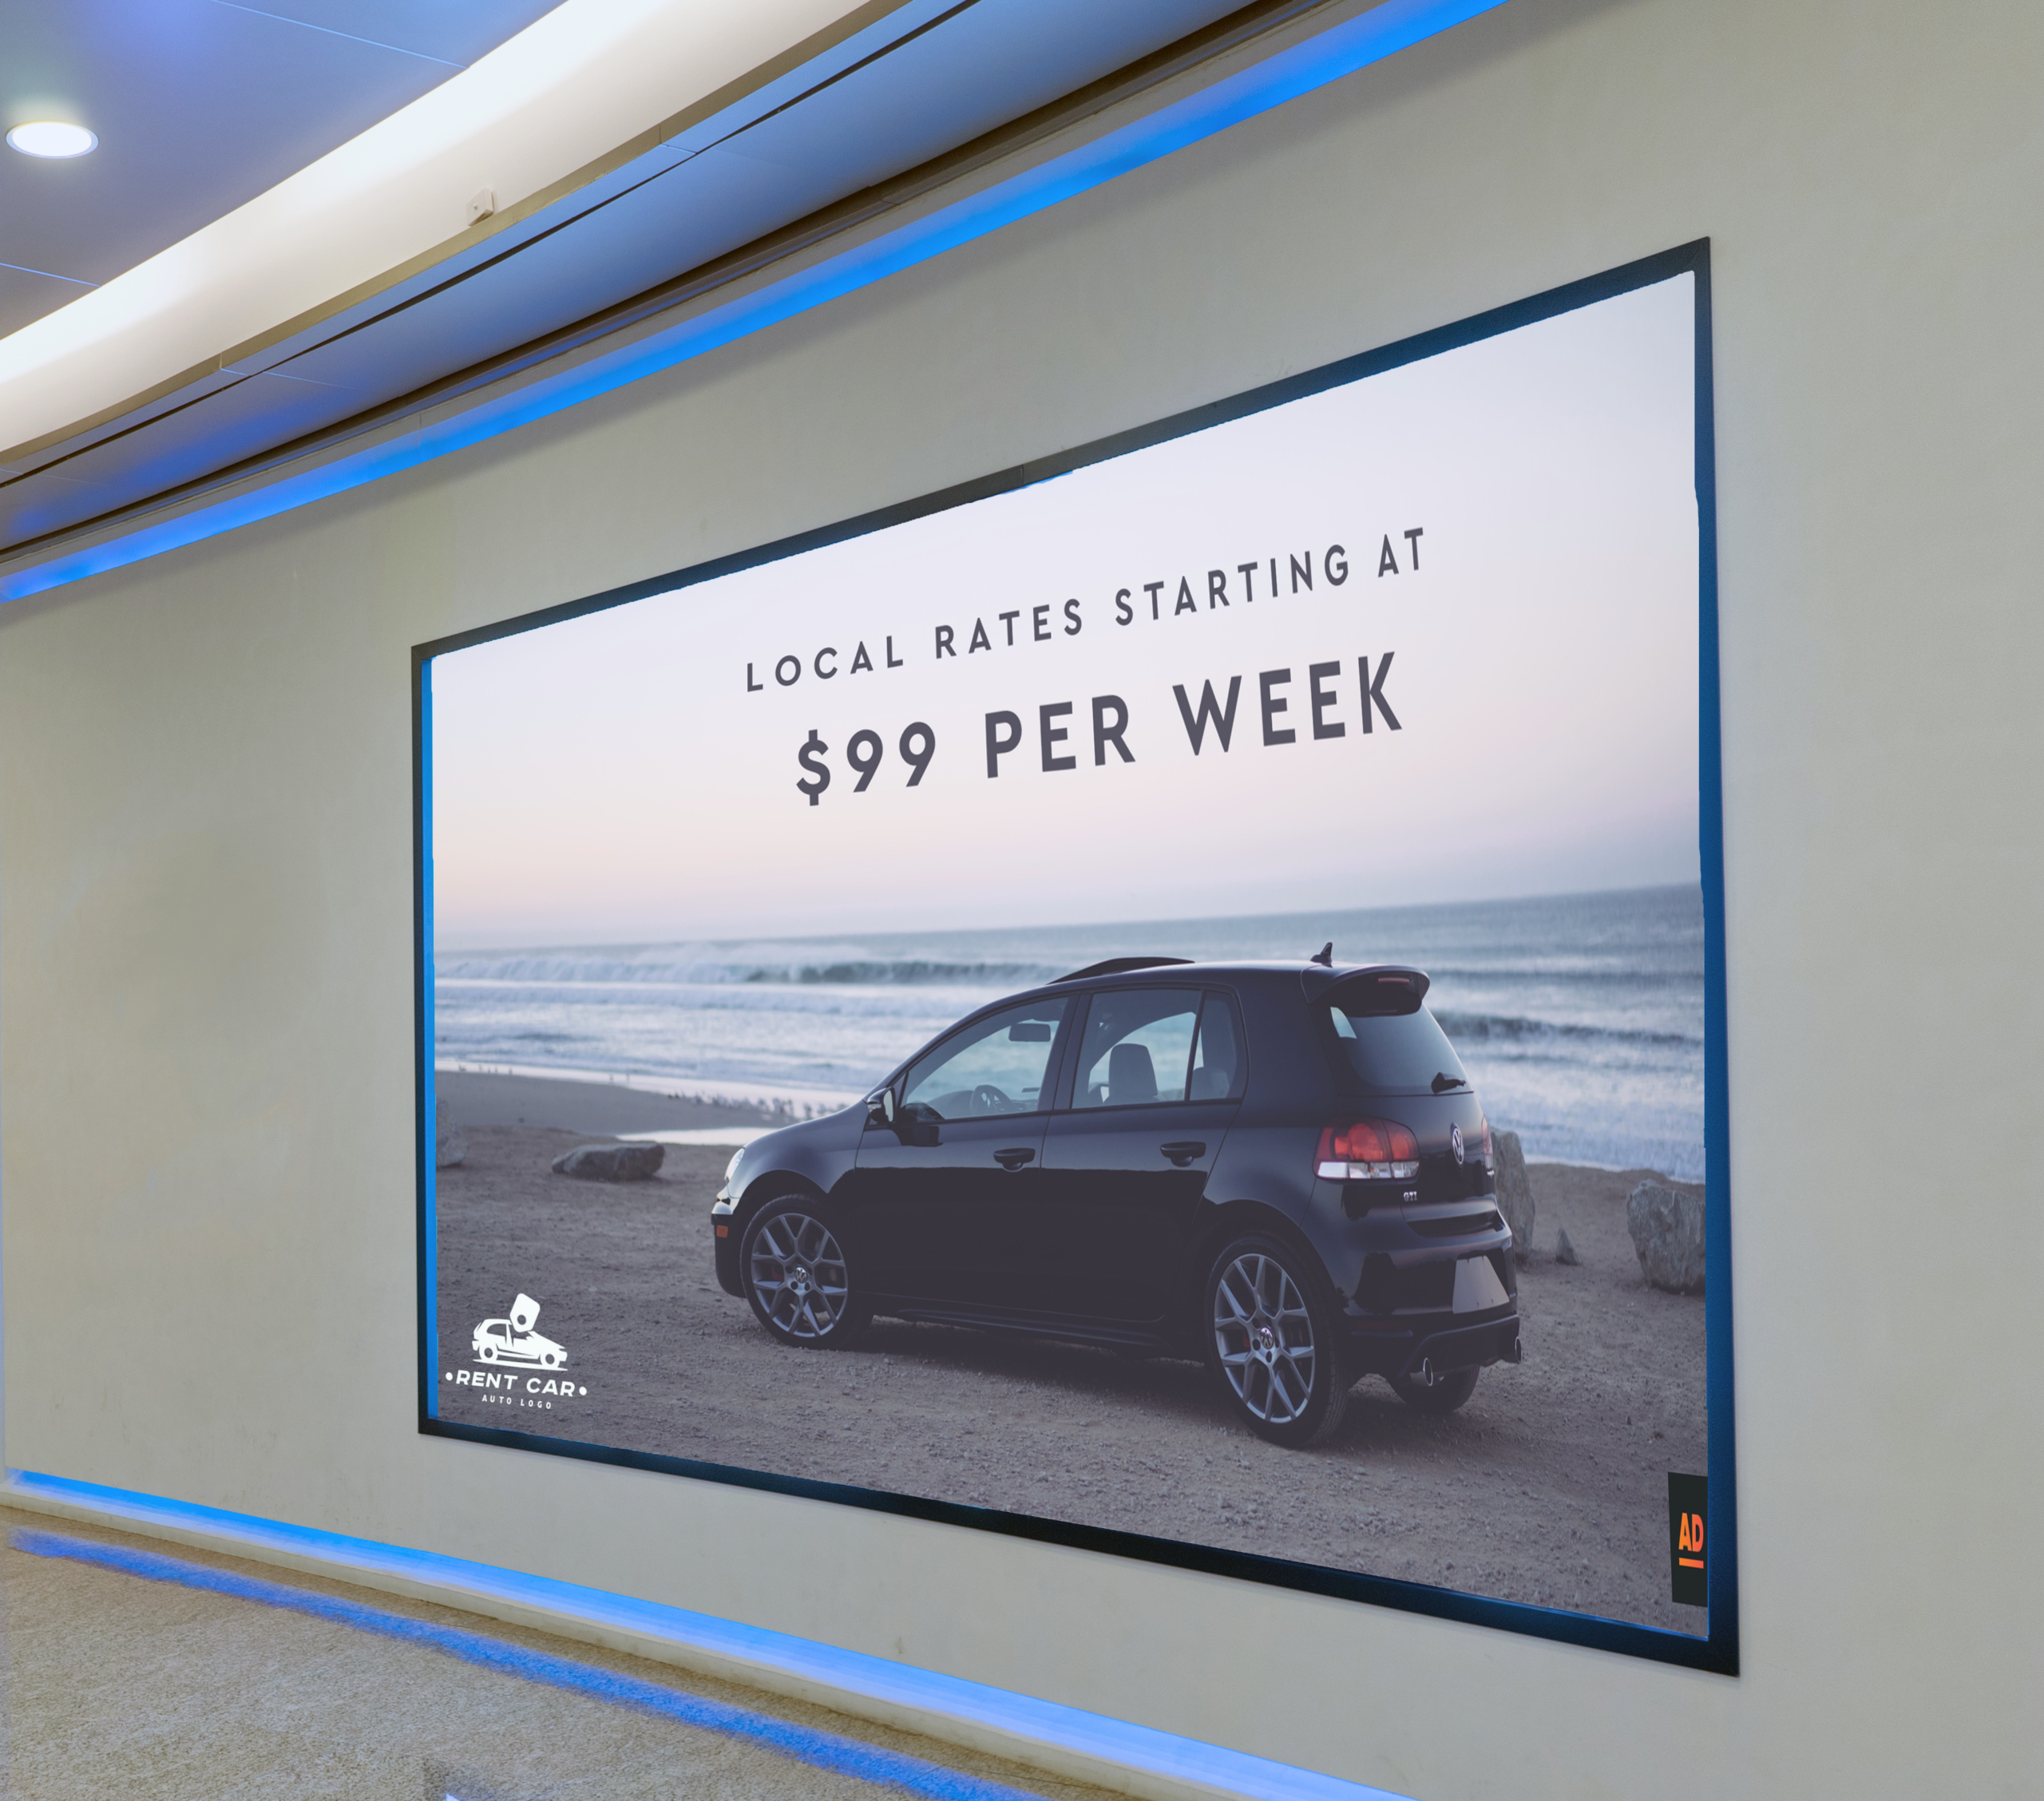 Automotive video wall showing a blue hatchback car on a beach with a promotional discount overhead.